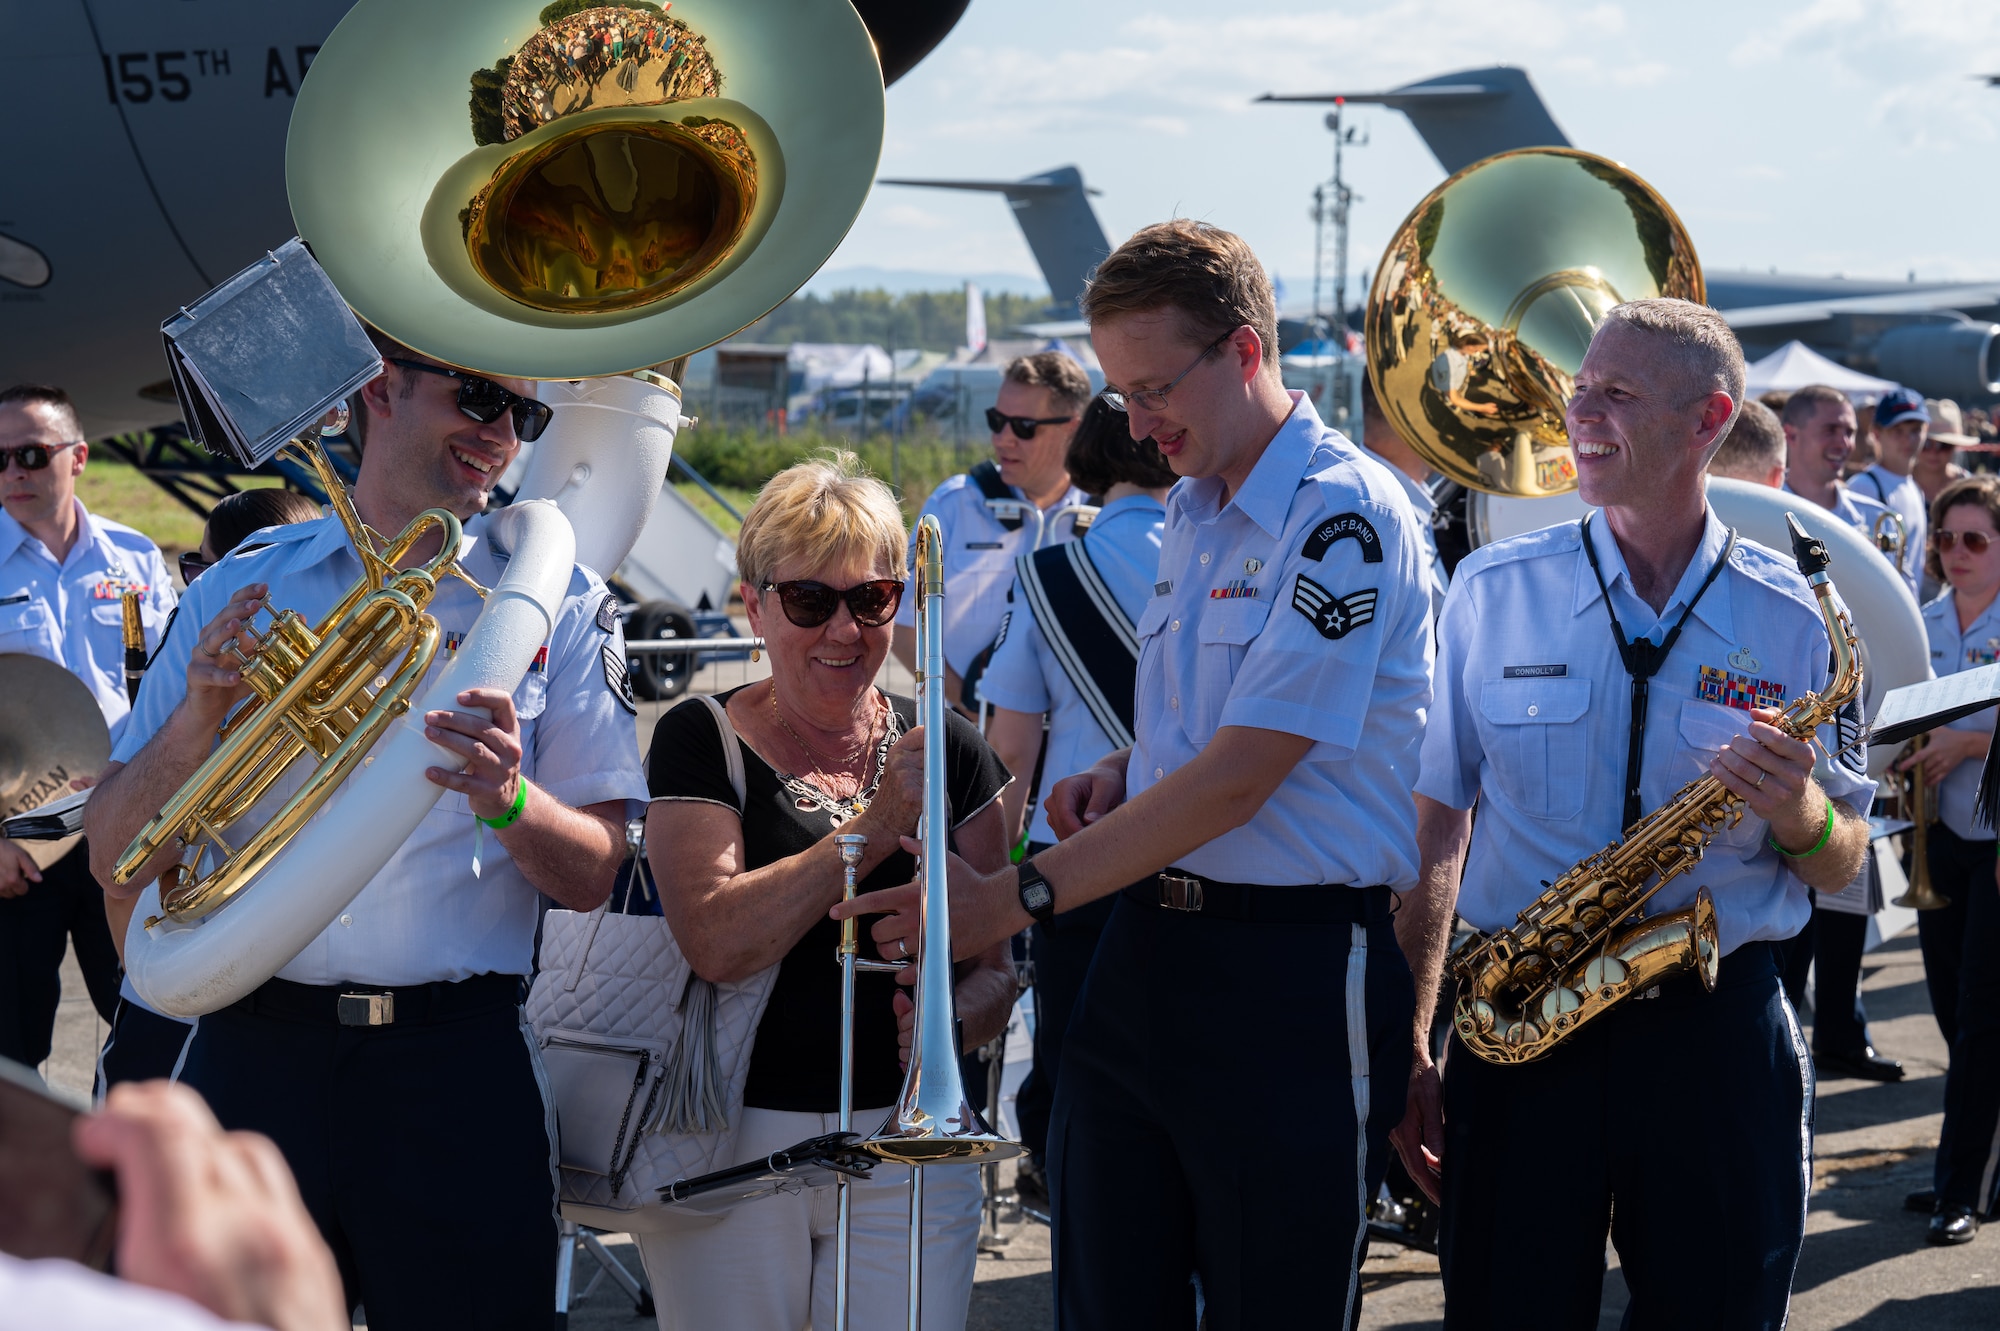 U.S. Air Force Airmen assigned to the U.S. Air Forces in Europe Ceremonial Band, prepare for a photo with a Czech woman after their performance during the NATO Days event at Leoš Janáček Airport in Ostrava, Czech Republic, Sept. 16, 2023.